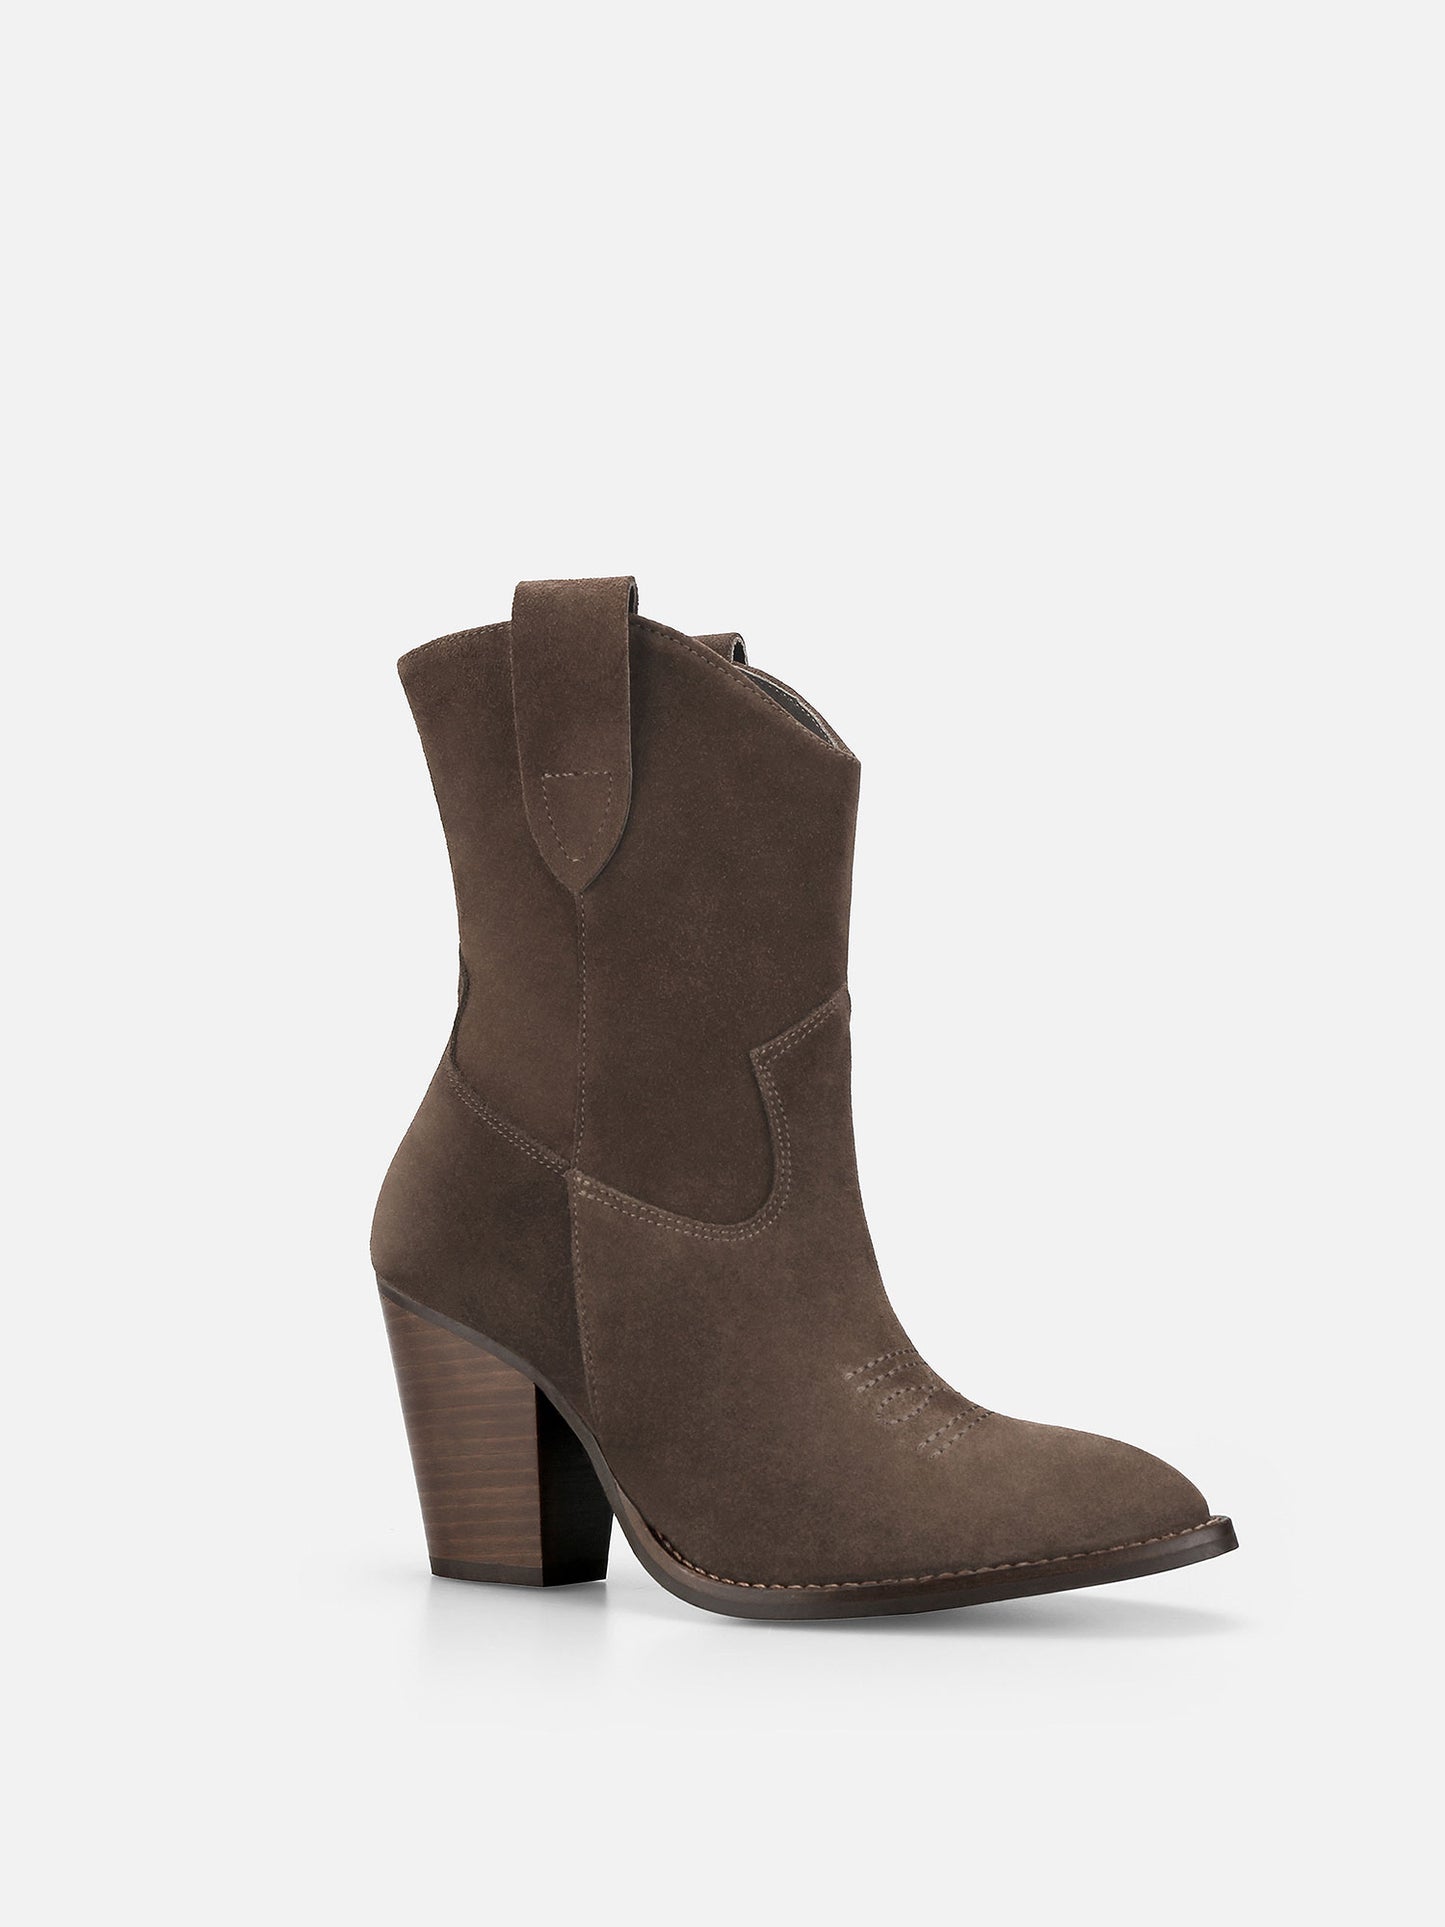 DOLLY Cowboy Leather Boots - Taupe